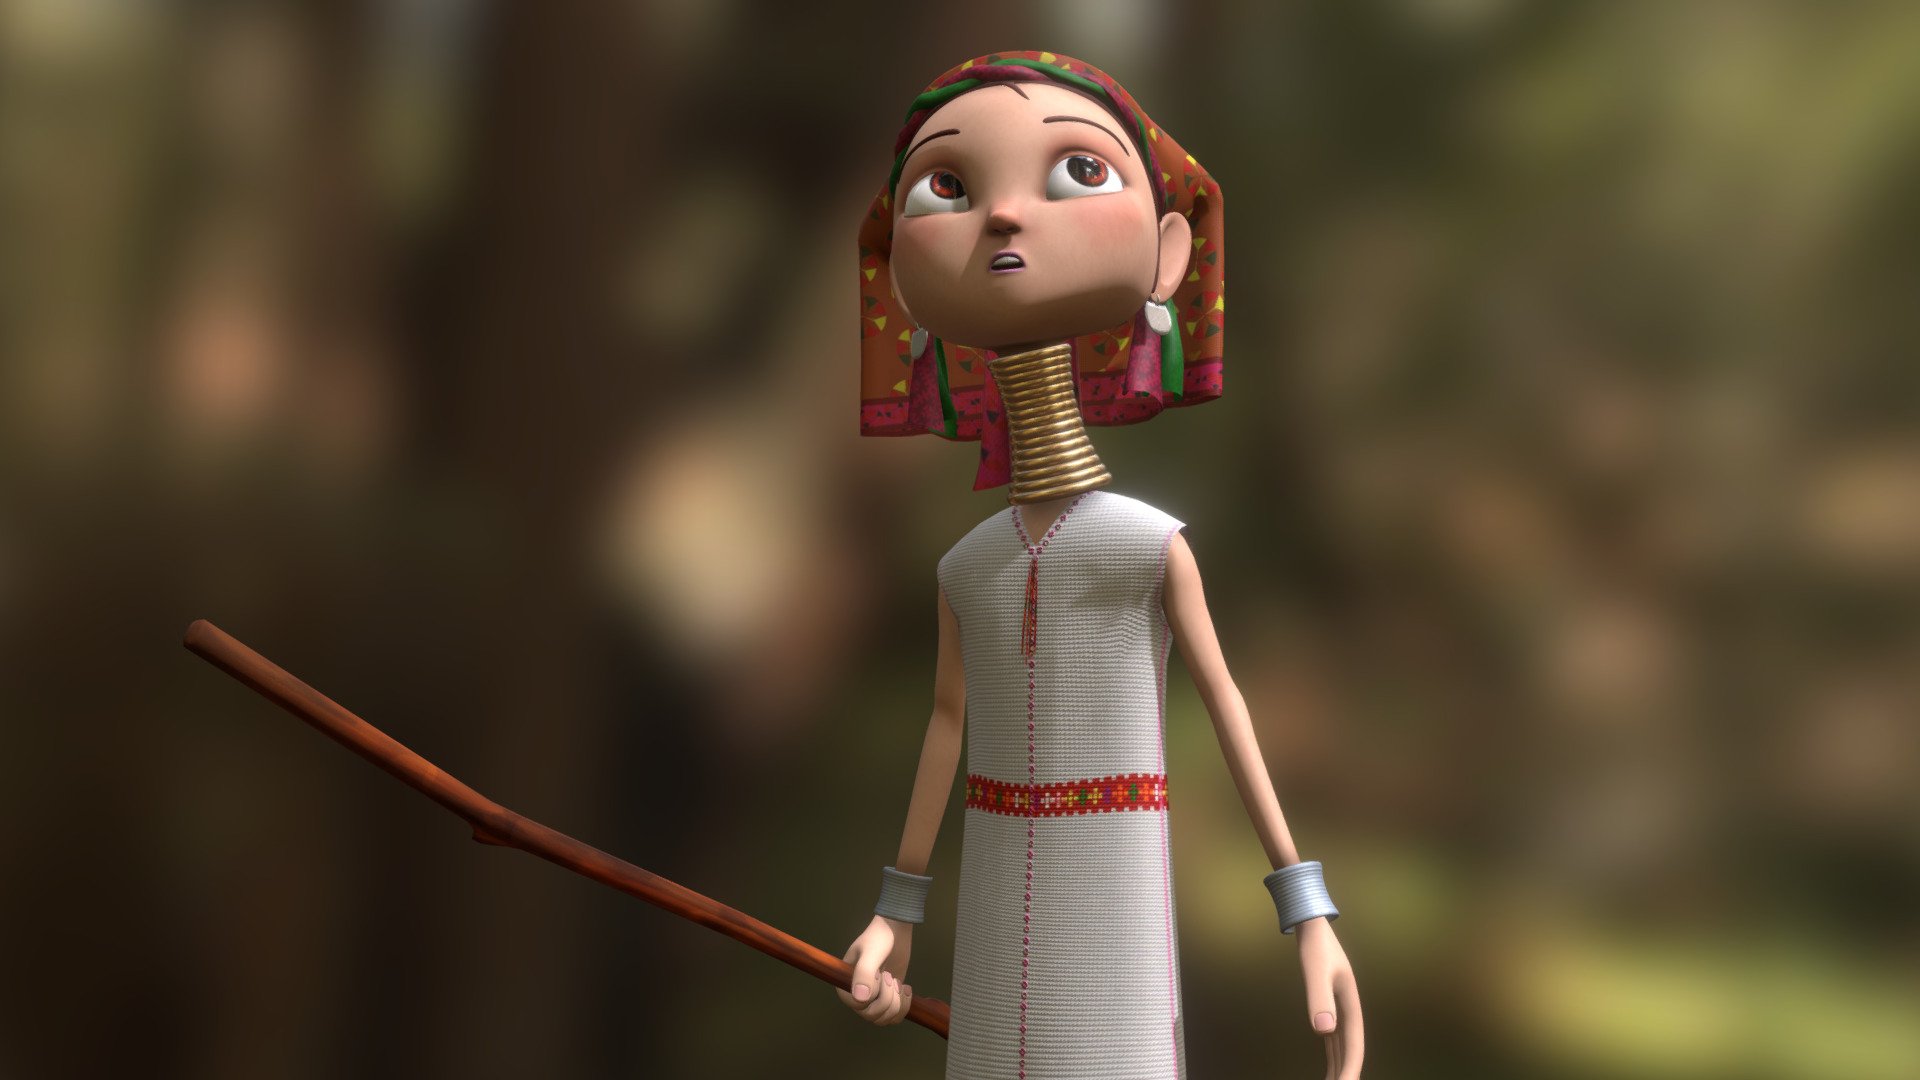 Norwa, a 14-year-old Kayan-ethnic girl who will save the planet with her little brother Jorpe and the son of Capital City, in the &ldquo;Echo Planet